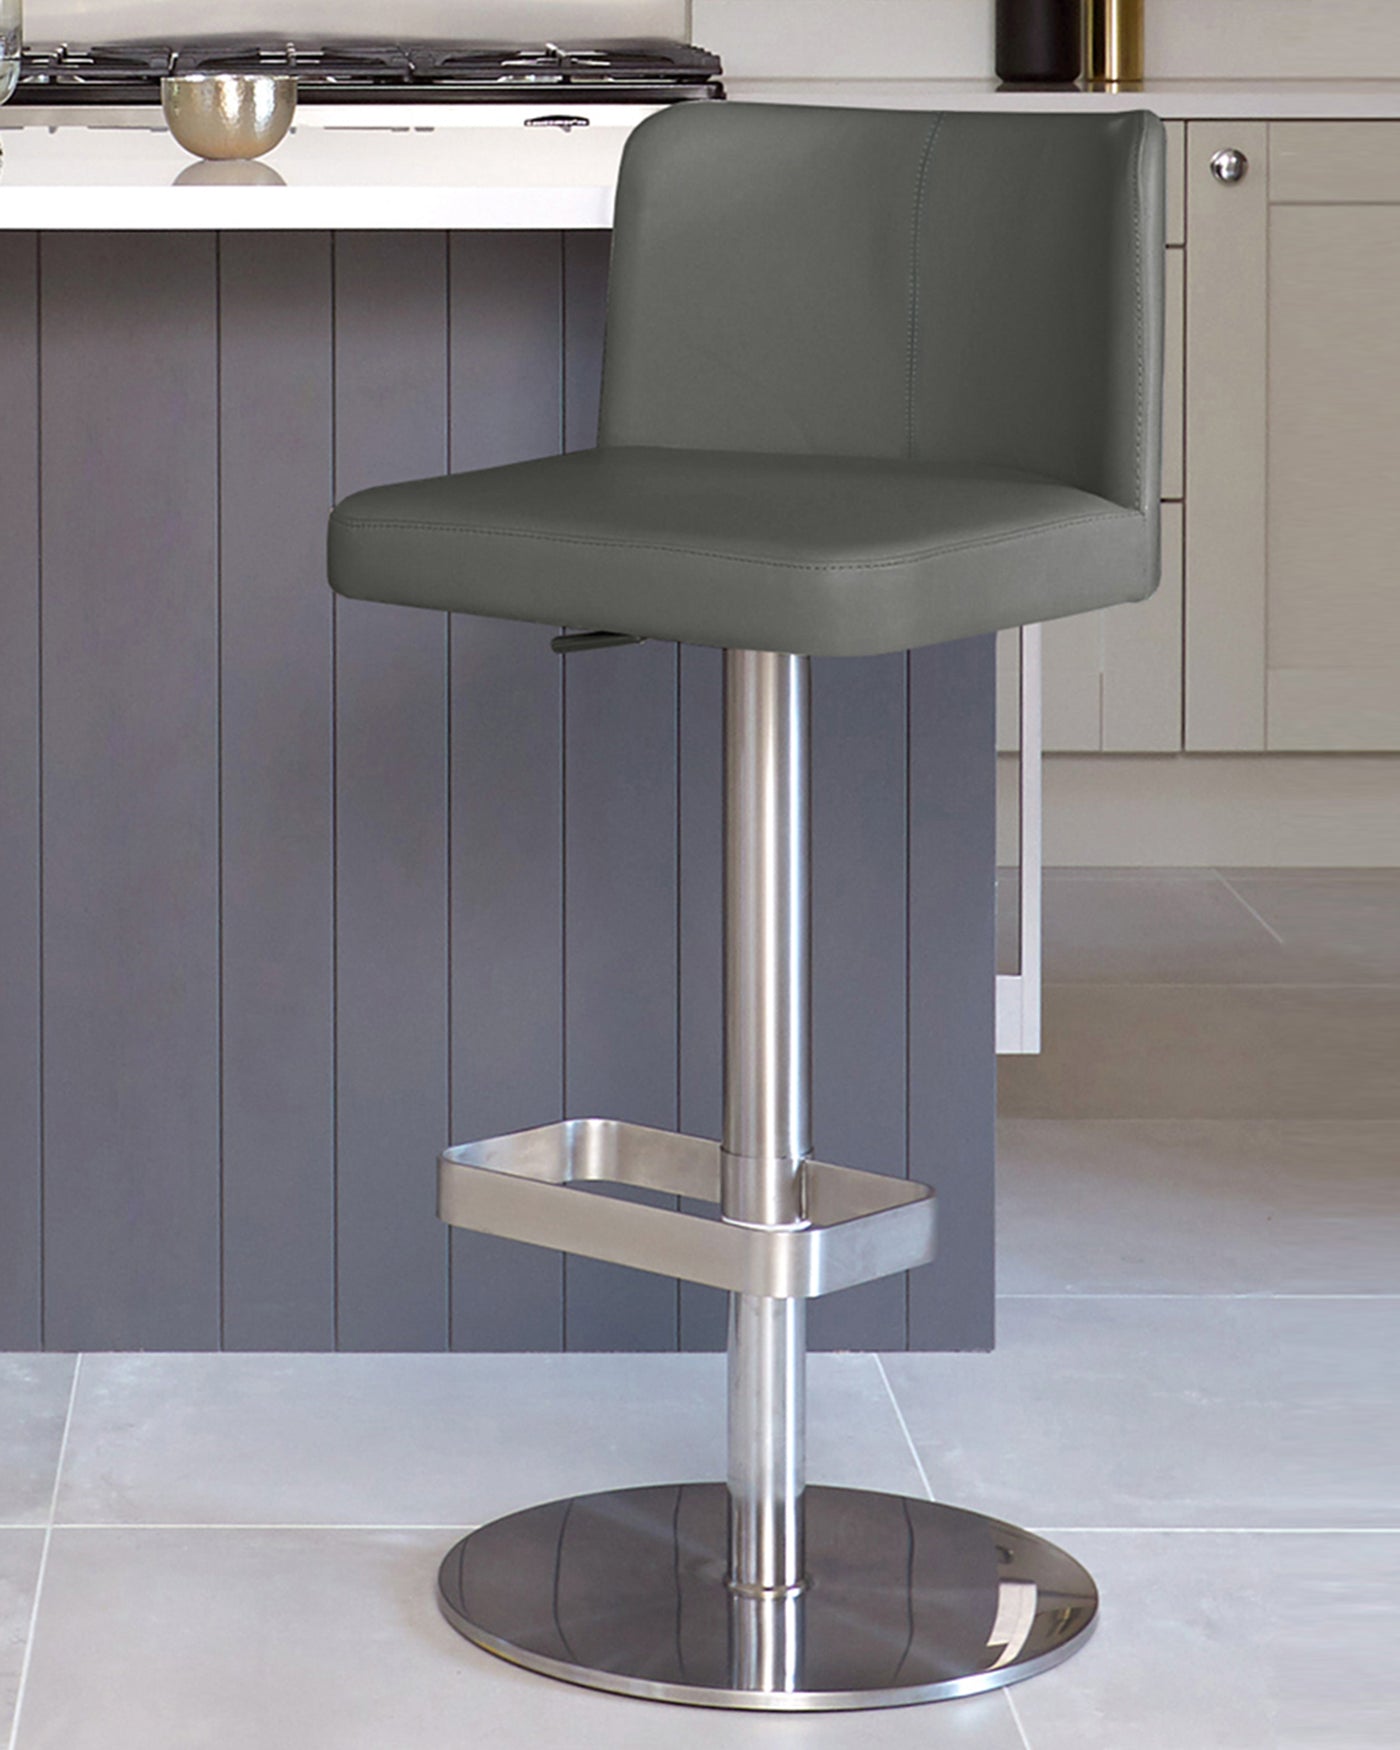 Modern adjustable-height bar stool with a sleek chrome pedestal base, built-in footrest, and a grey faux leather seat with a low backrest.